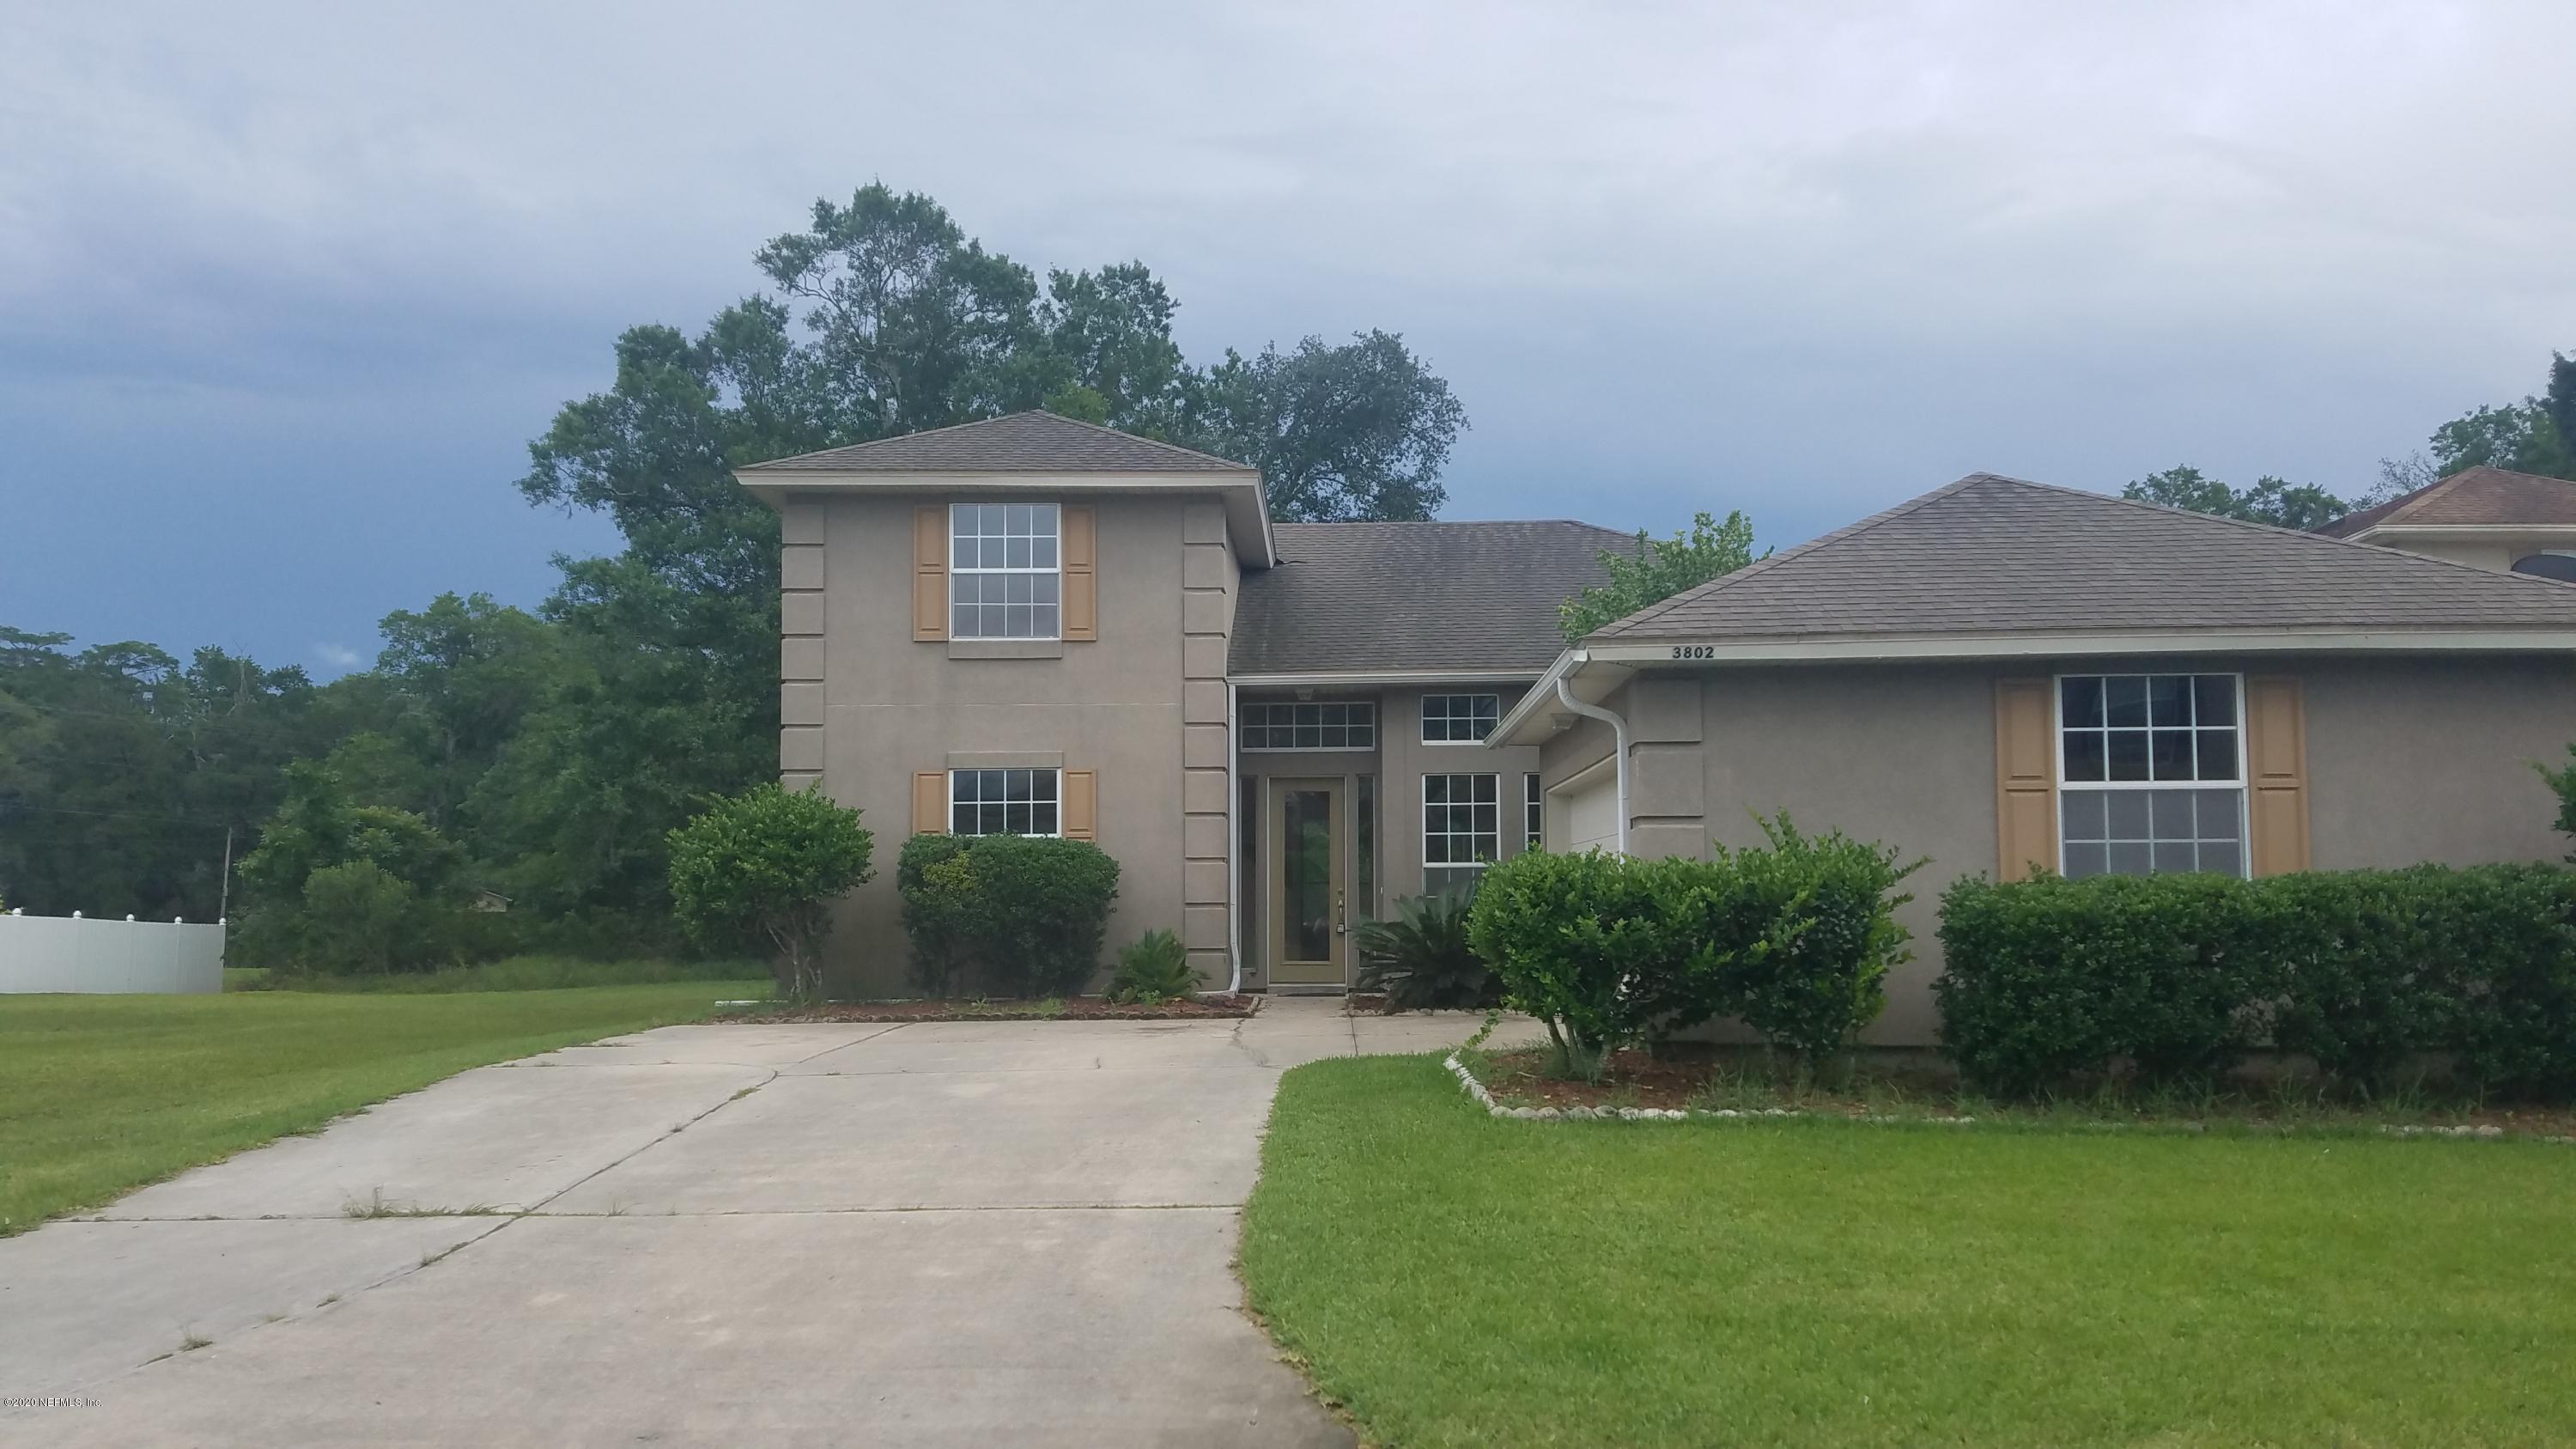 Middleburg, FL home for sale located at 3802 BEDFORD Drive, Middleburg, FL 32068